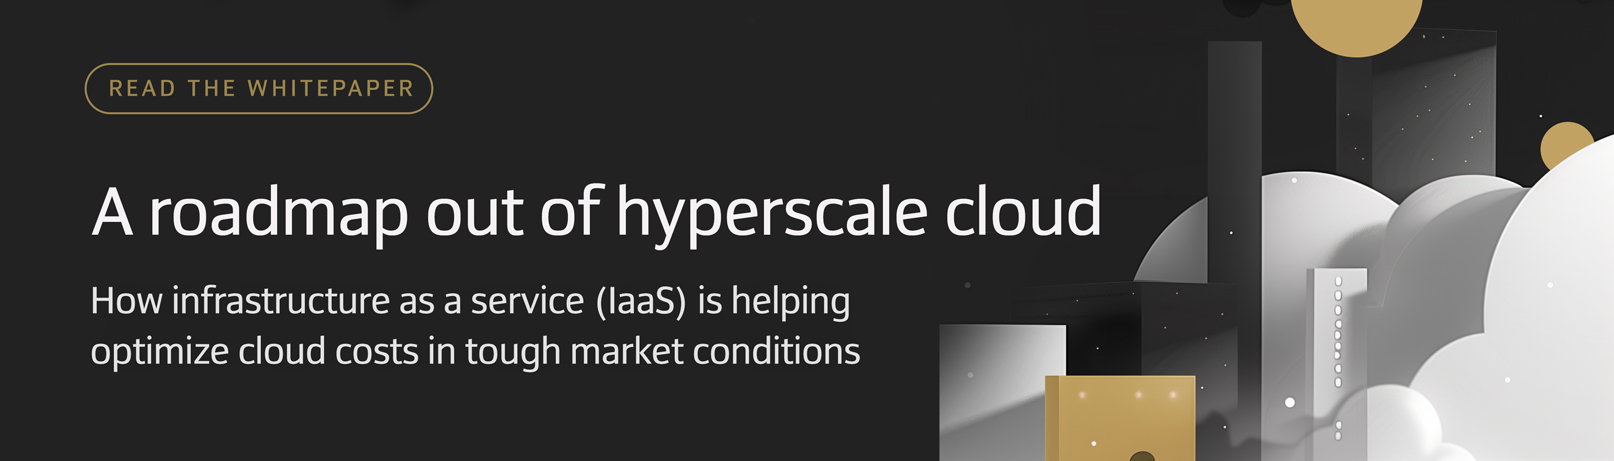 hyperscale cloud whitepaper banner